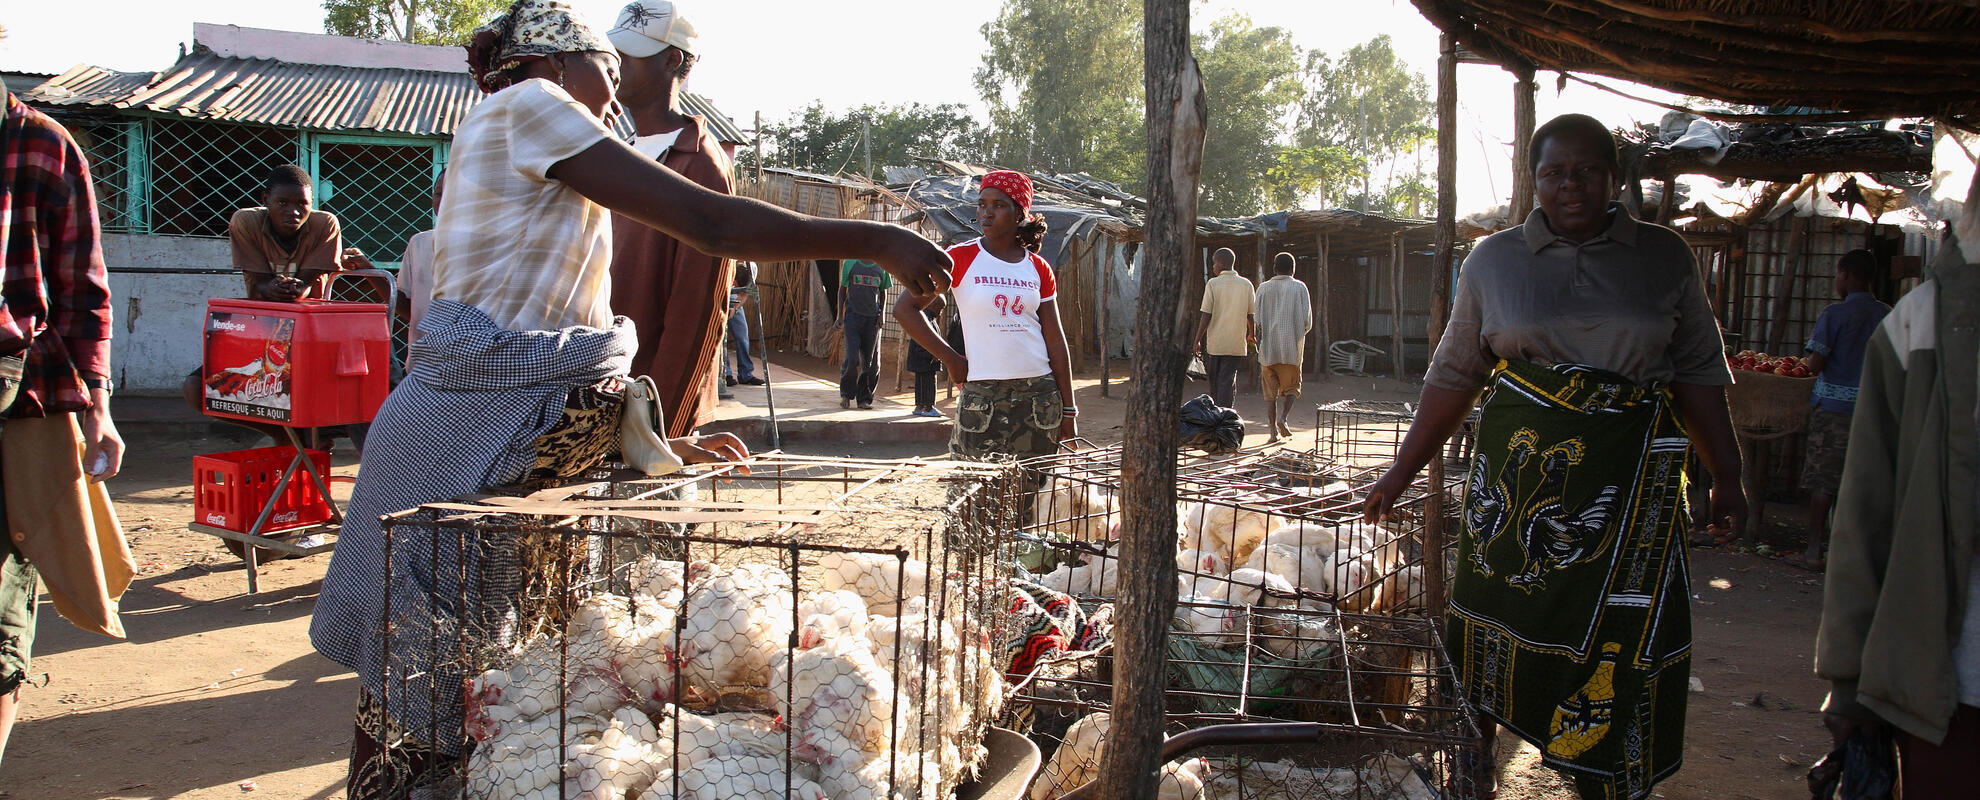 Poultry sellers in Mozambique #2 (ILRI / Stevie Mann).